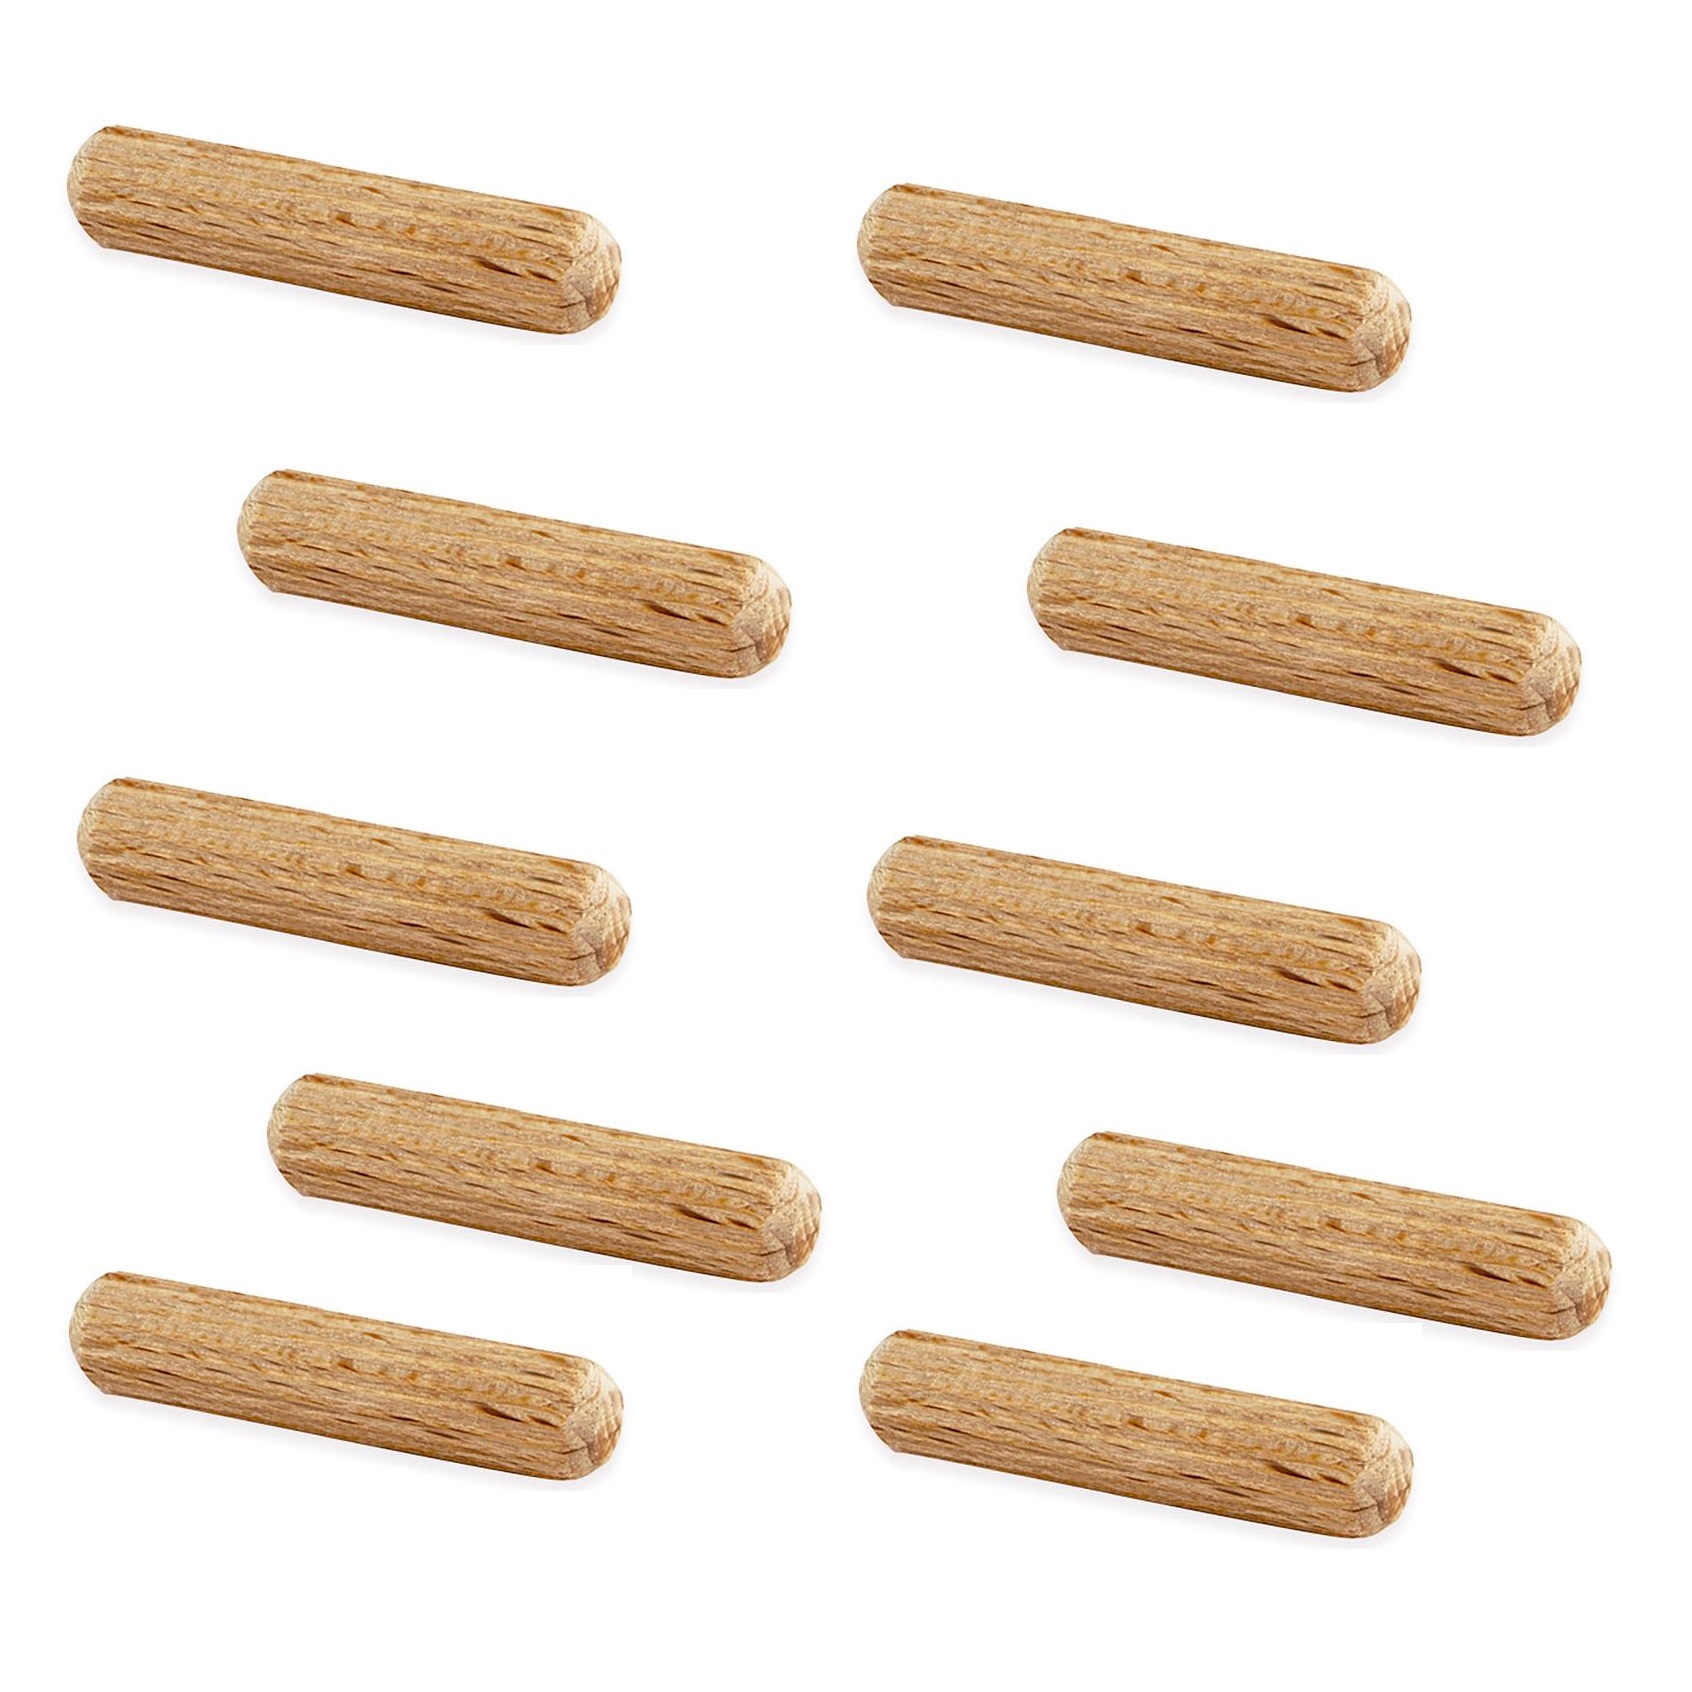 10 pieces of long wood dowels made of beech wood, surface: ribbed